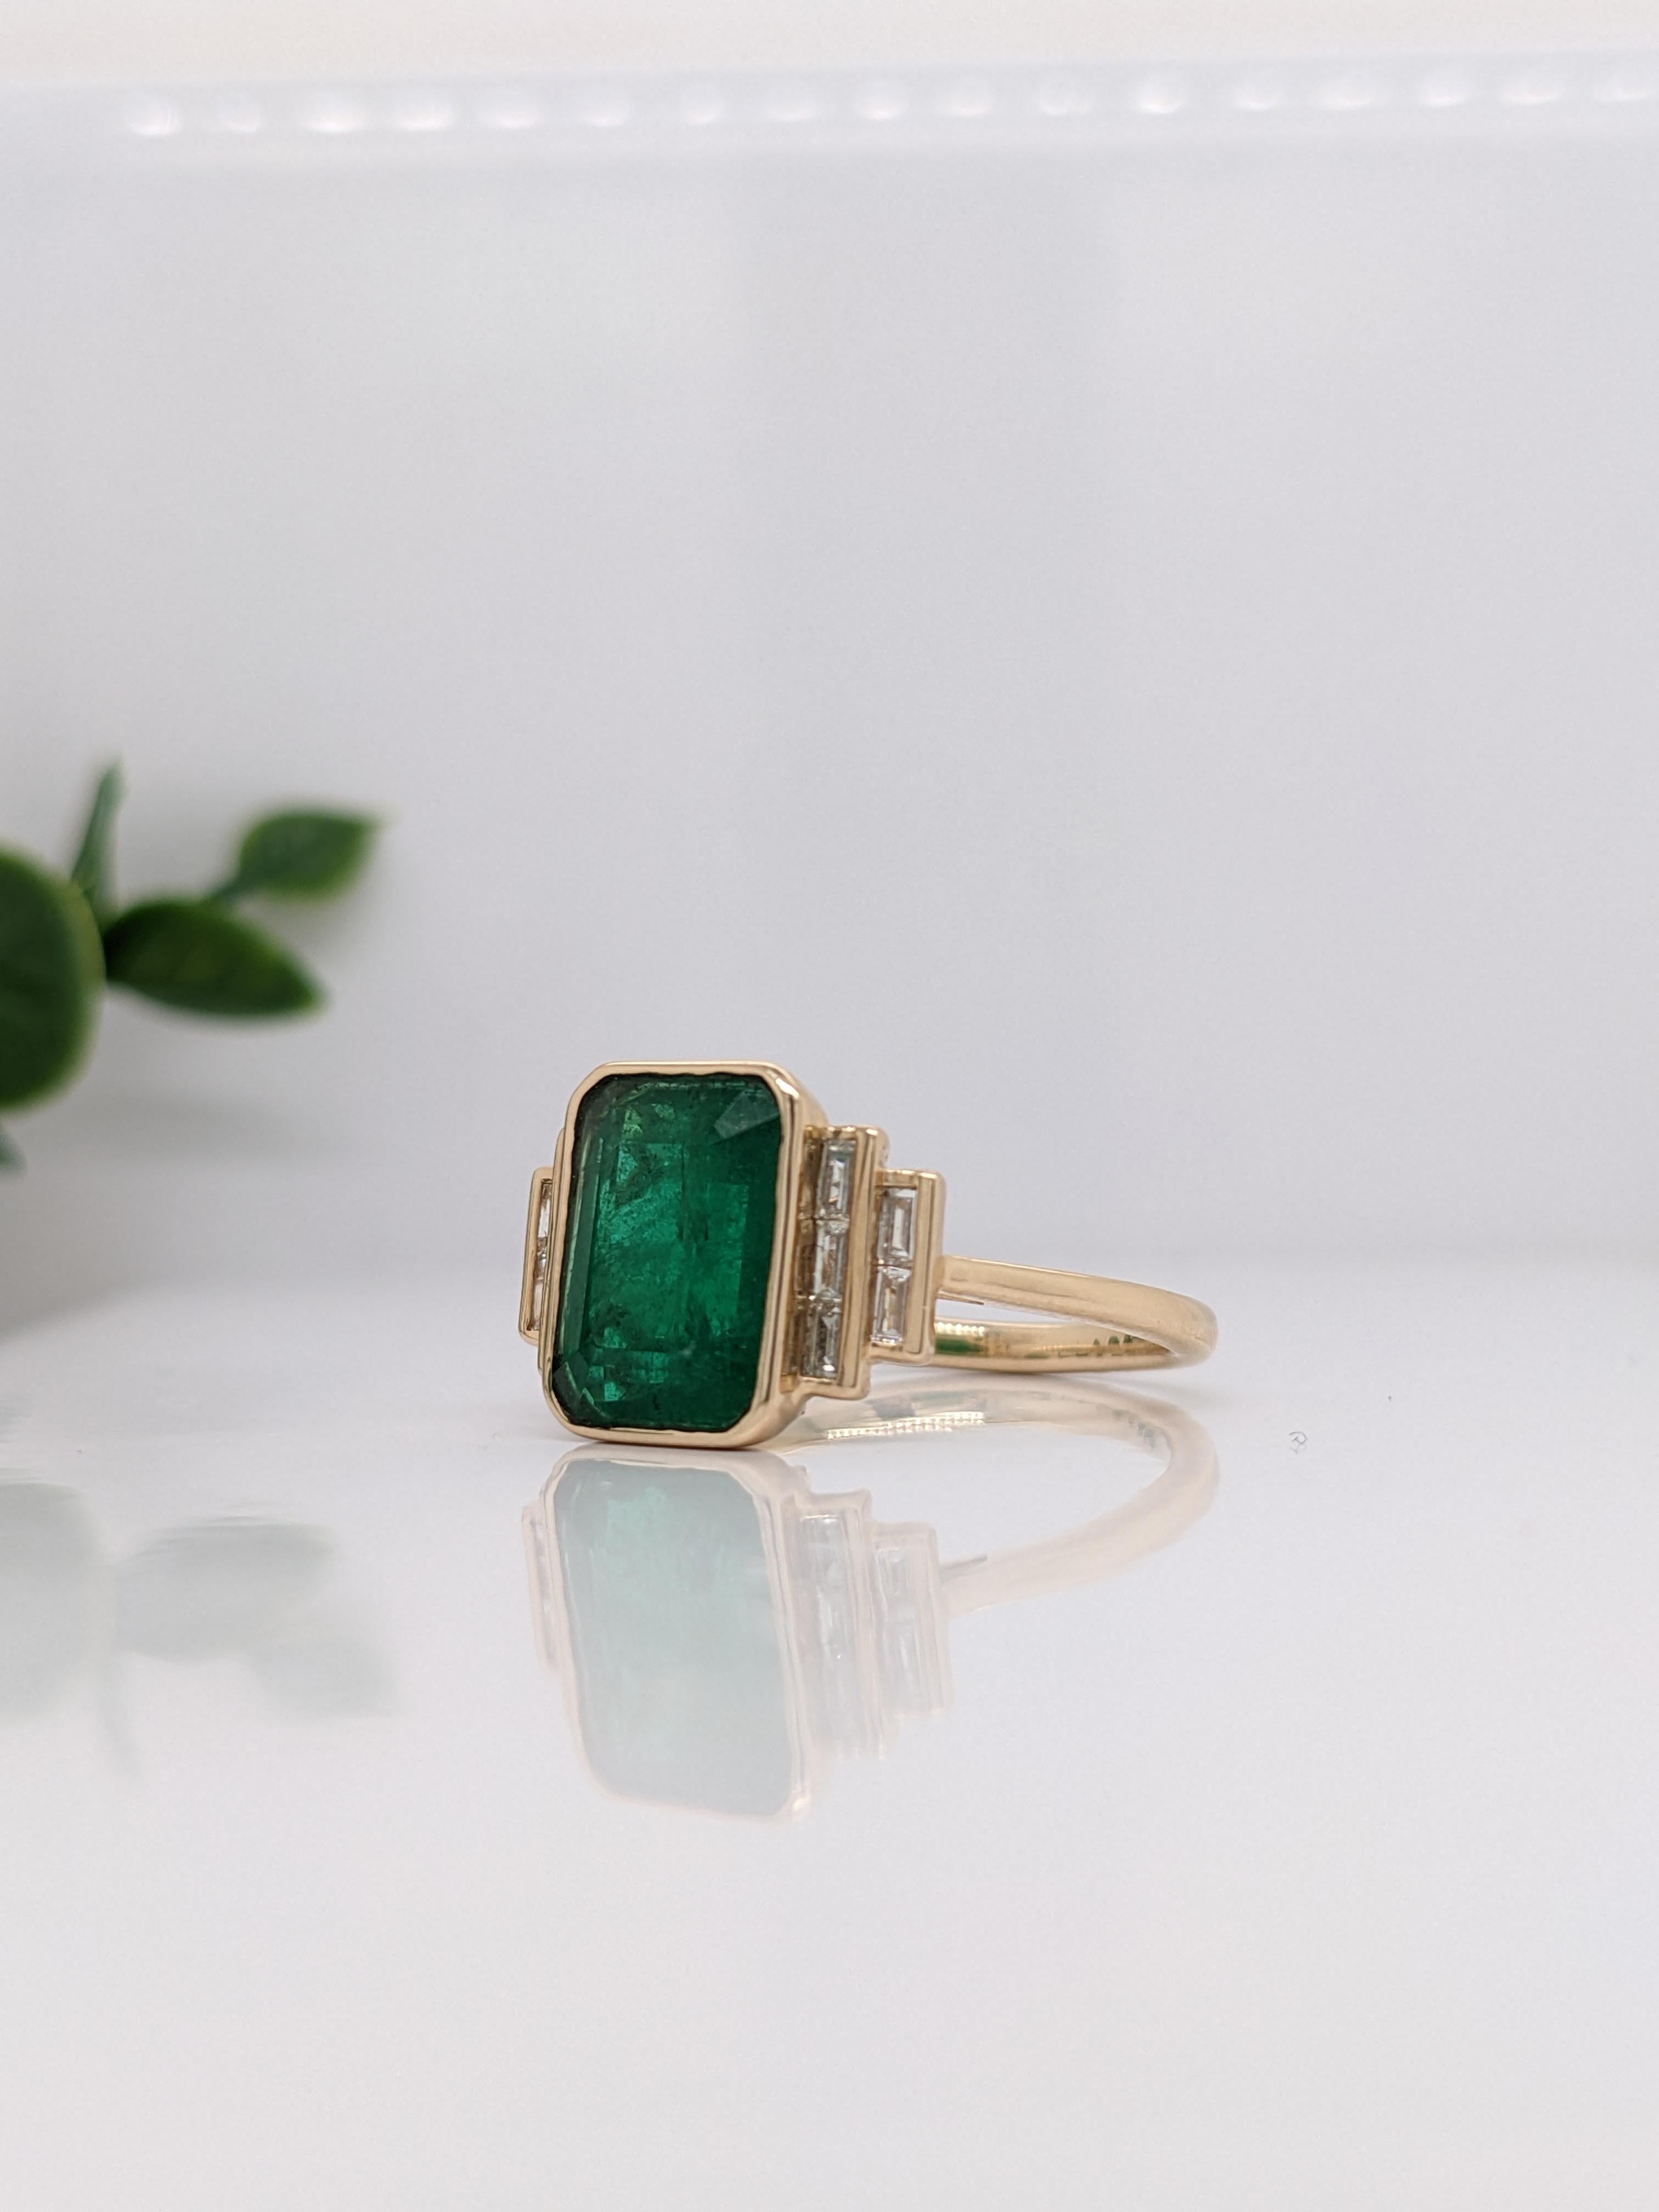 This gorgeous ring features a 3.03 carat emerald gemstone with natural earth mined baguette diamond accents, all set in solid 14k gold. This ring makes a beautiful may birthstone ring for your loved ones! 

Specifications

Item Type: Ring
Center